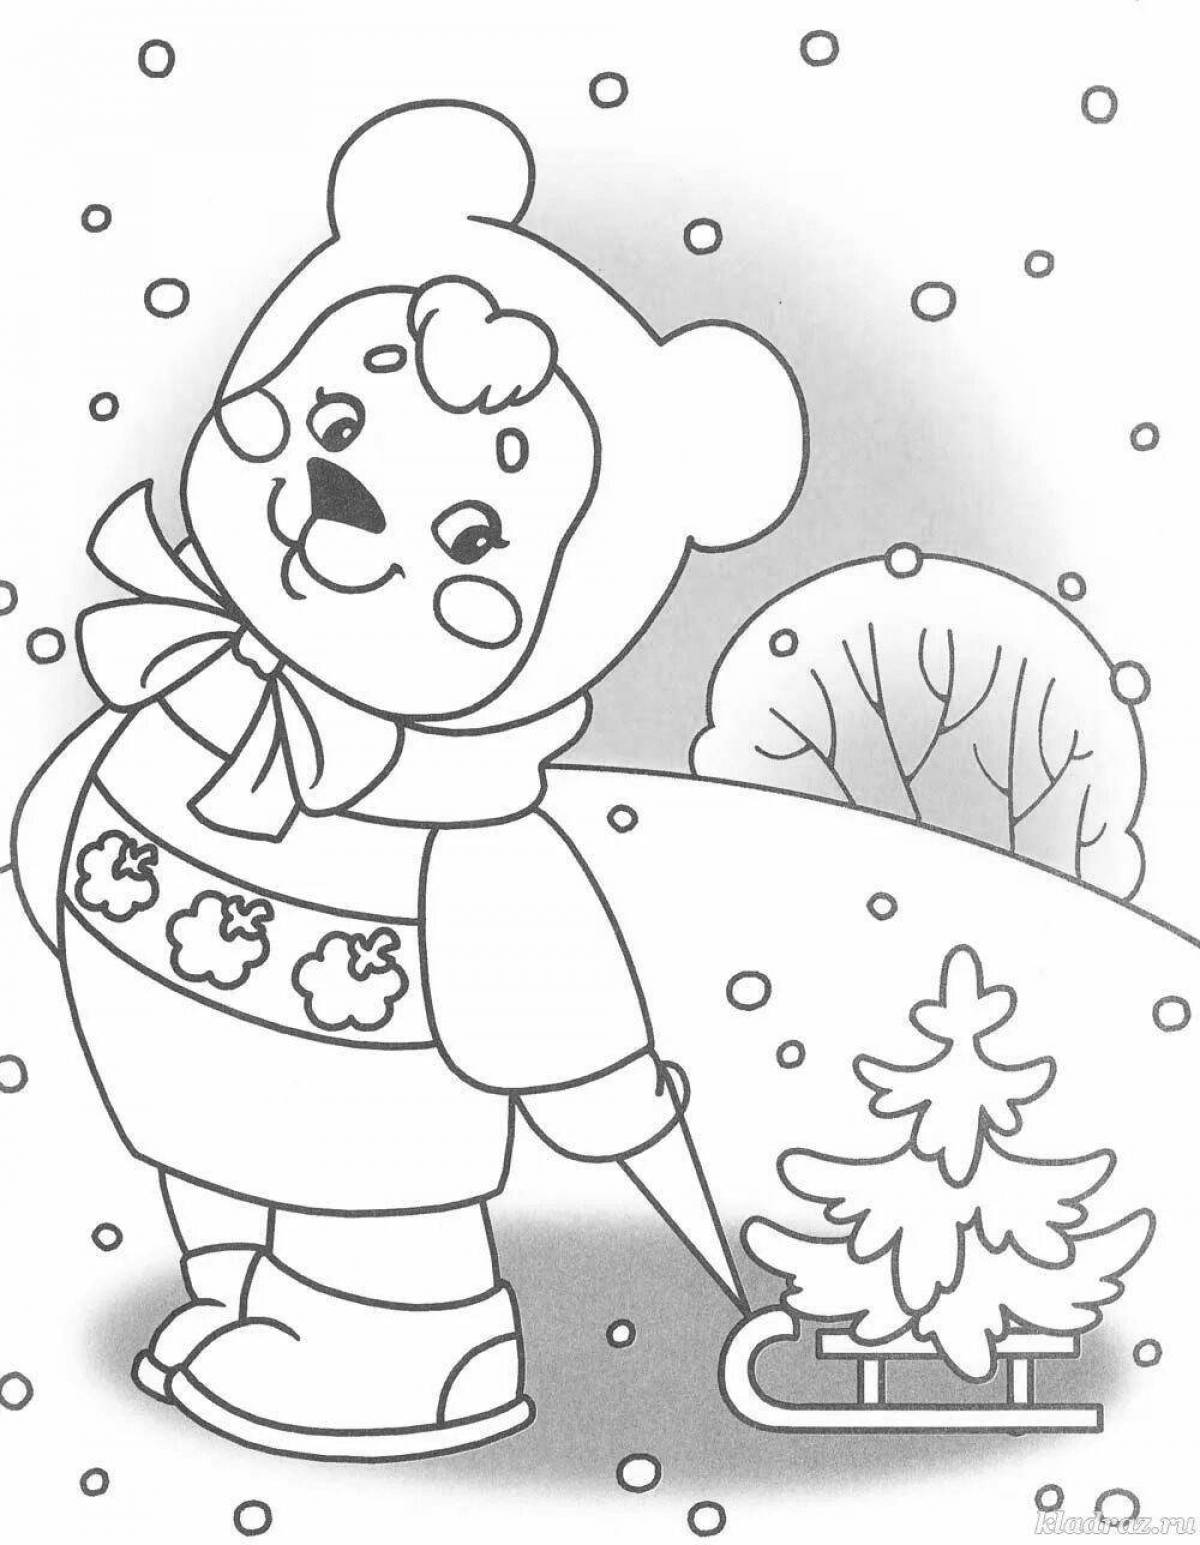 Glorious winter coloring book for children 3-4 years old